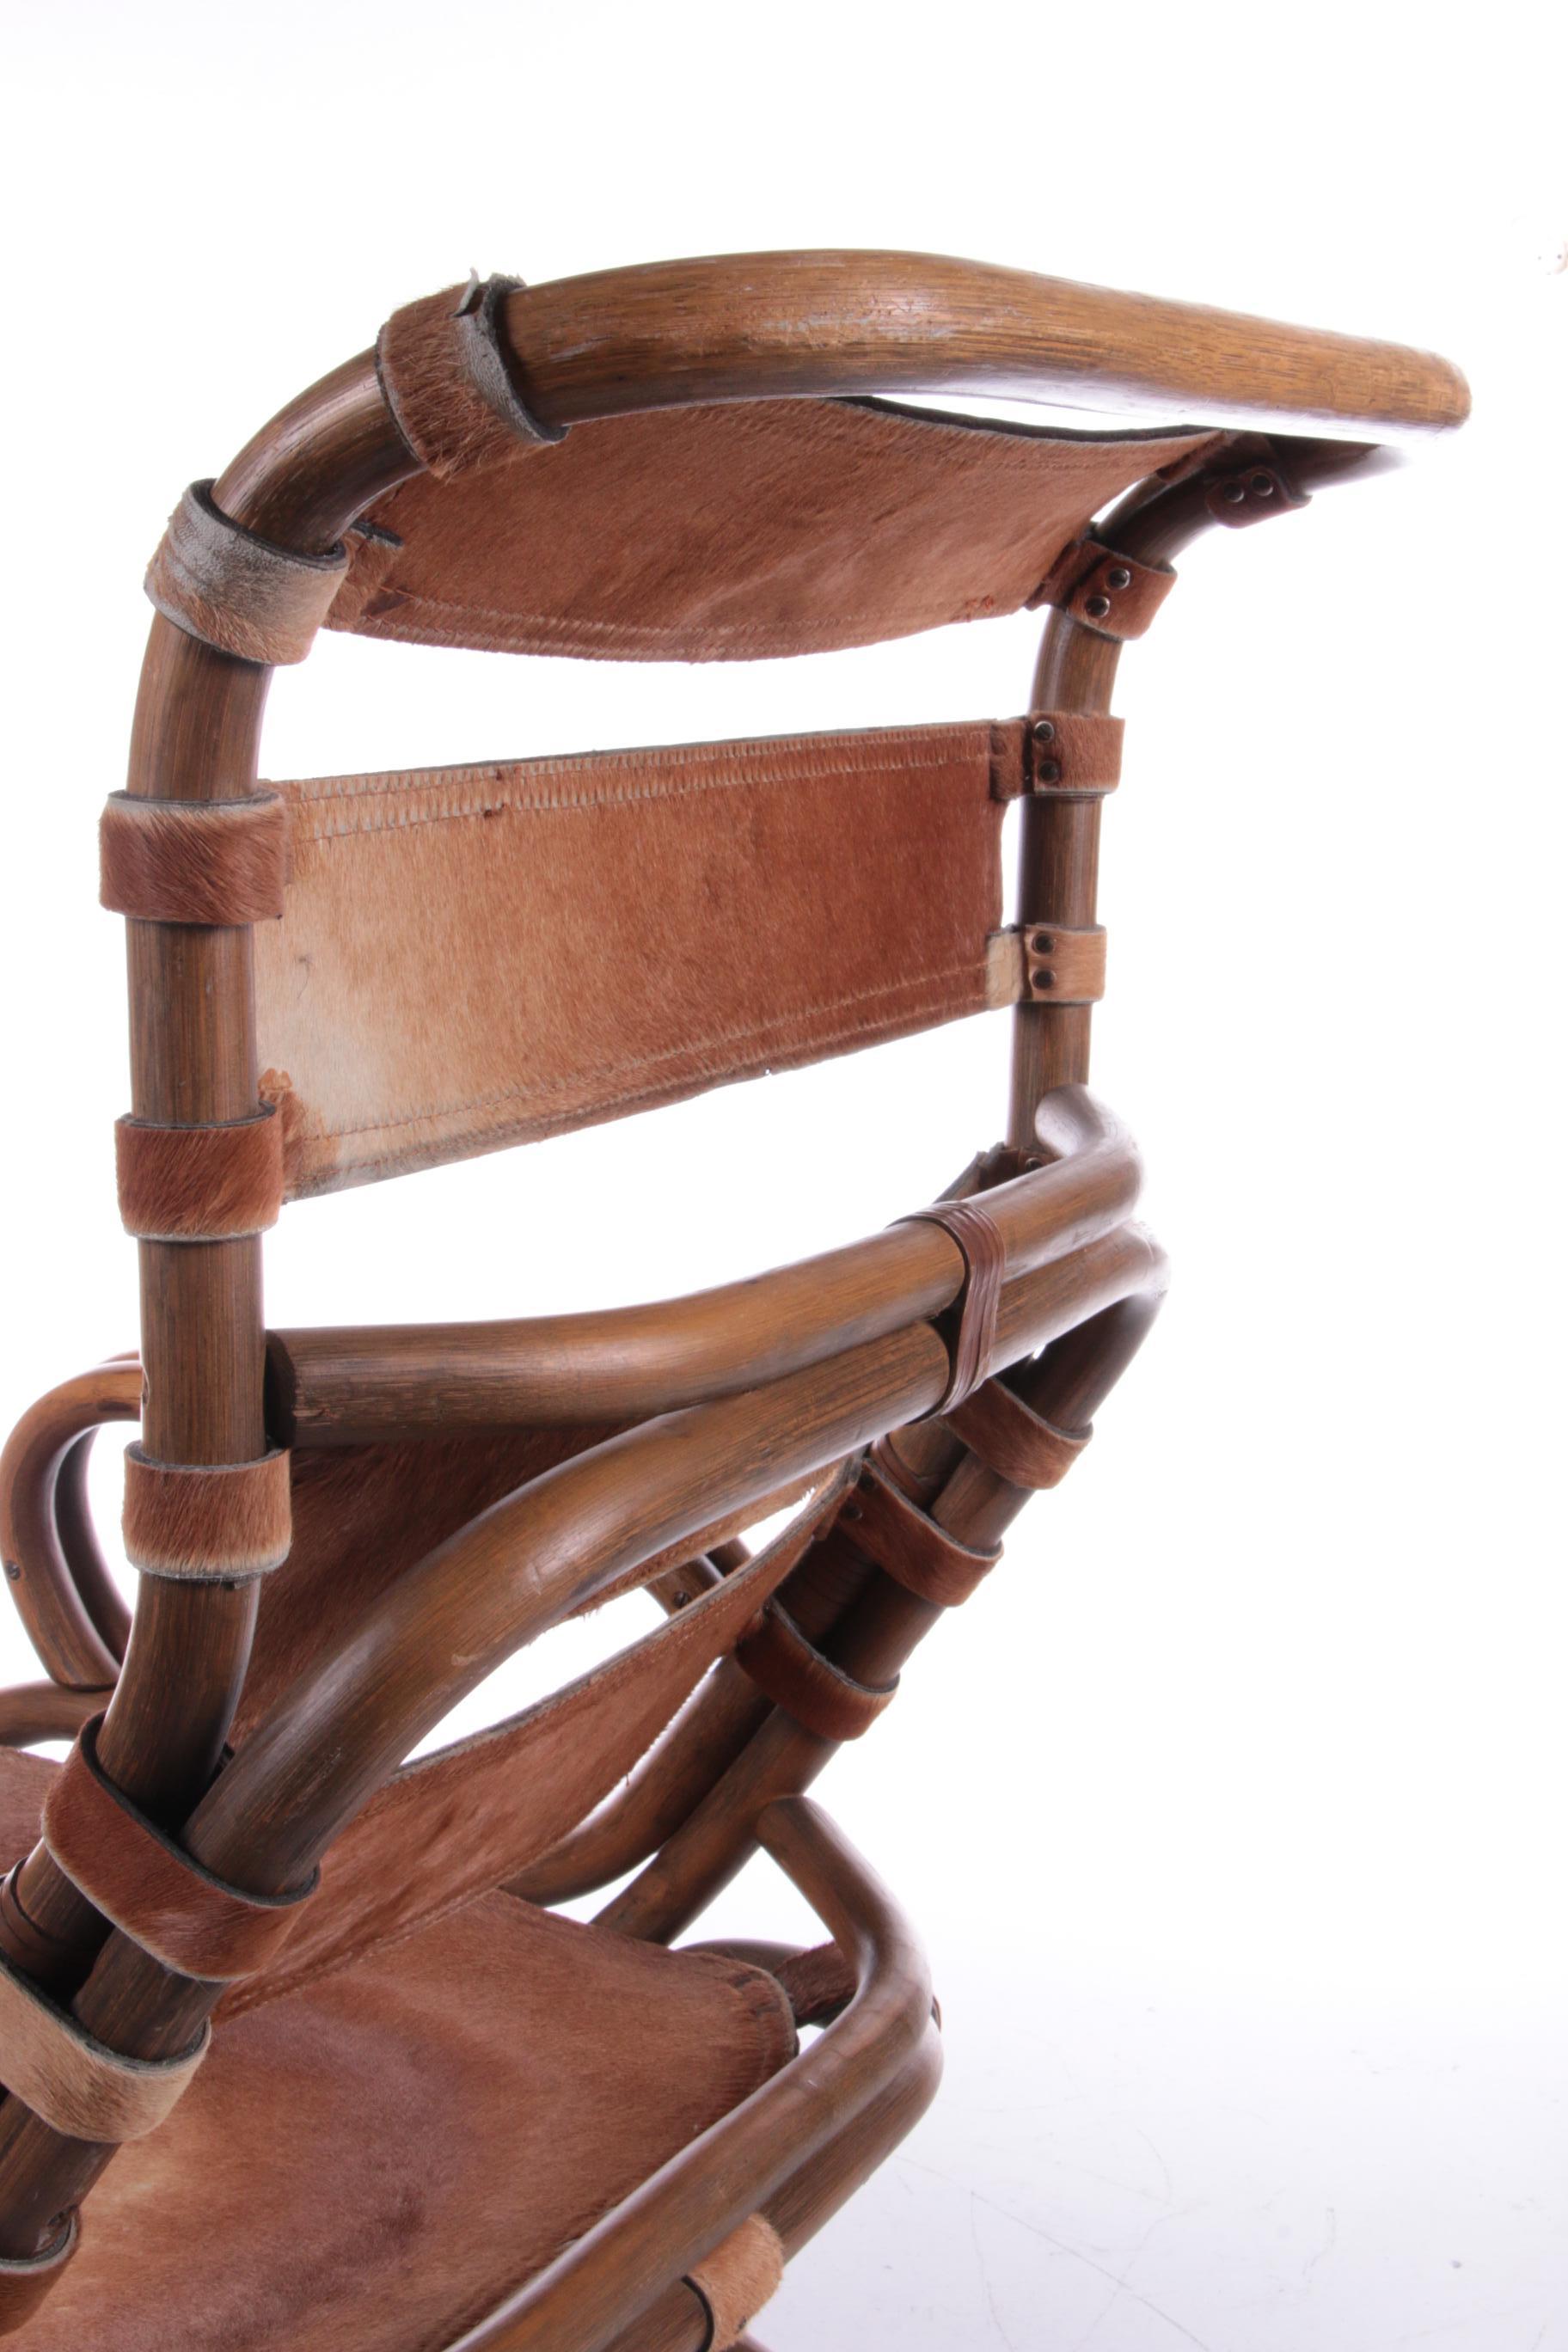 Tito Agnoli Relax Chair Made of Bamboo and Leather, 1960 For Sale 9